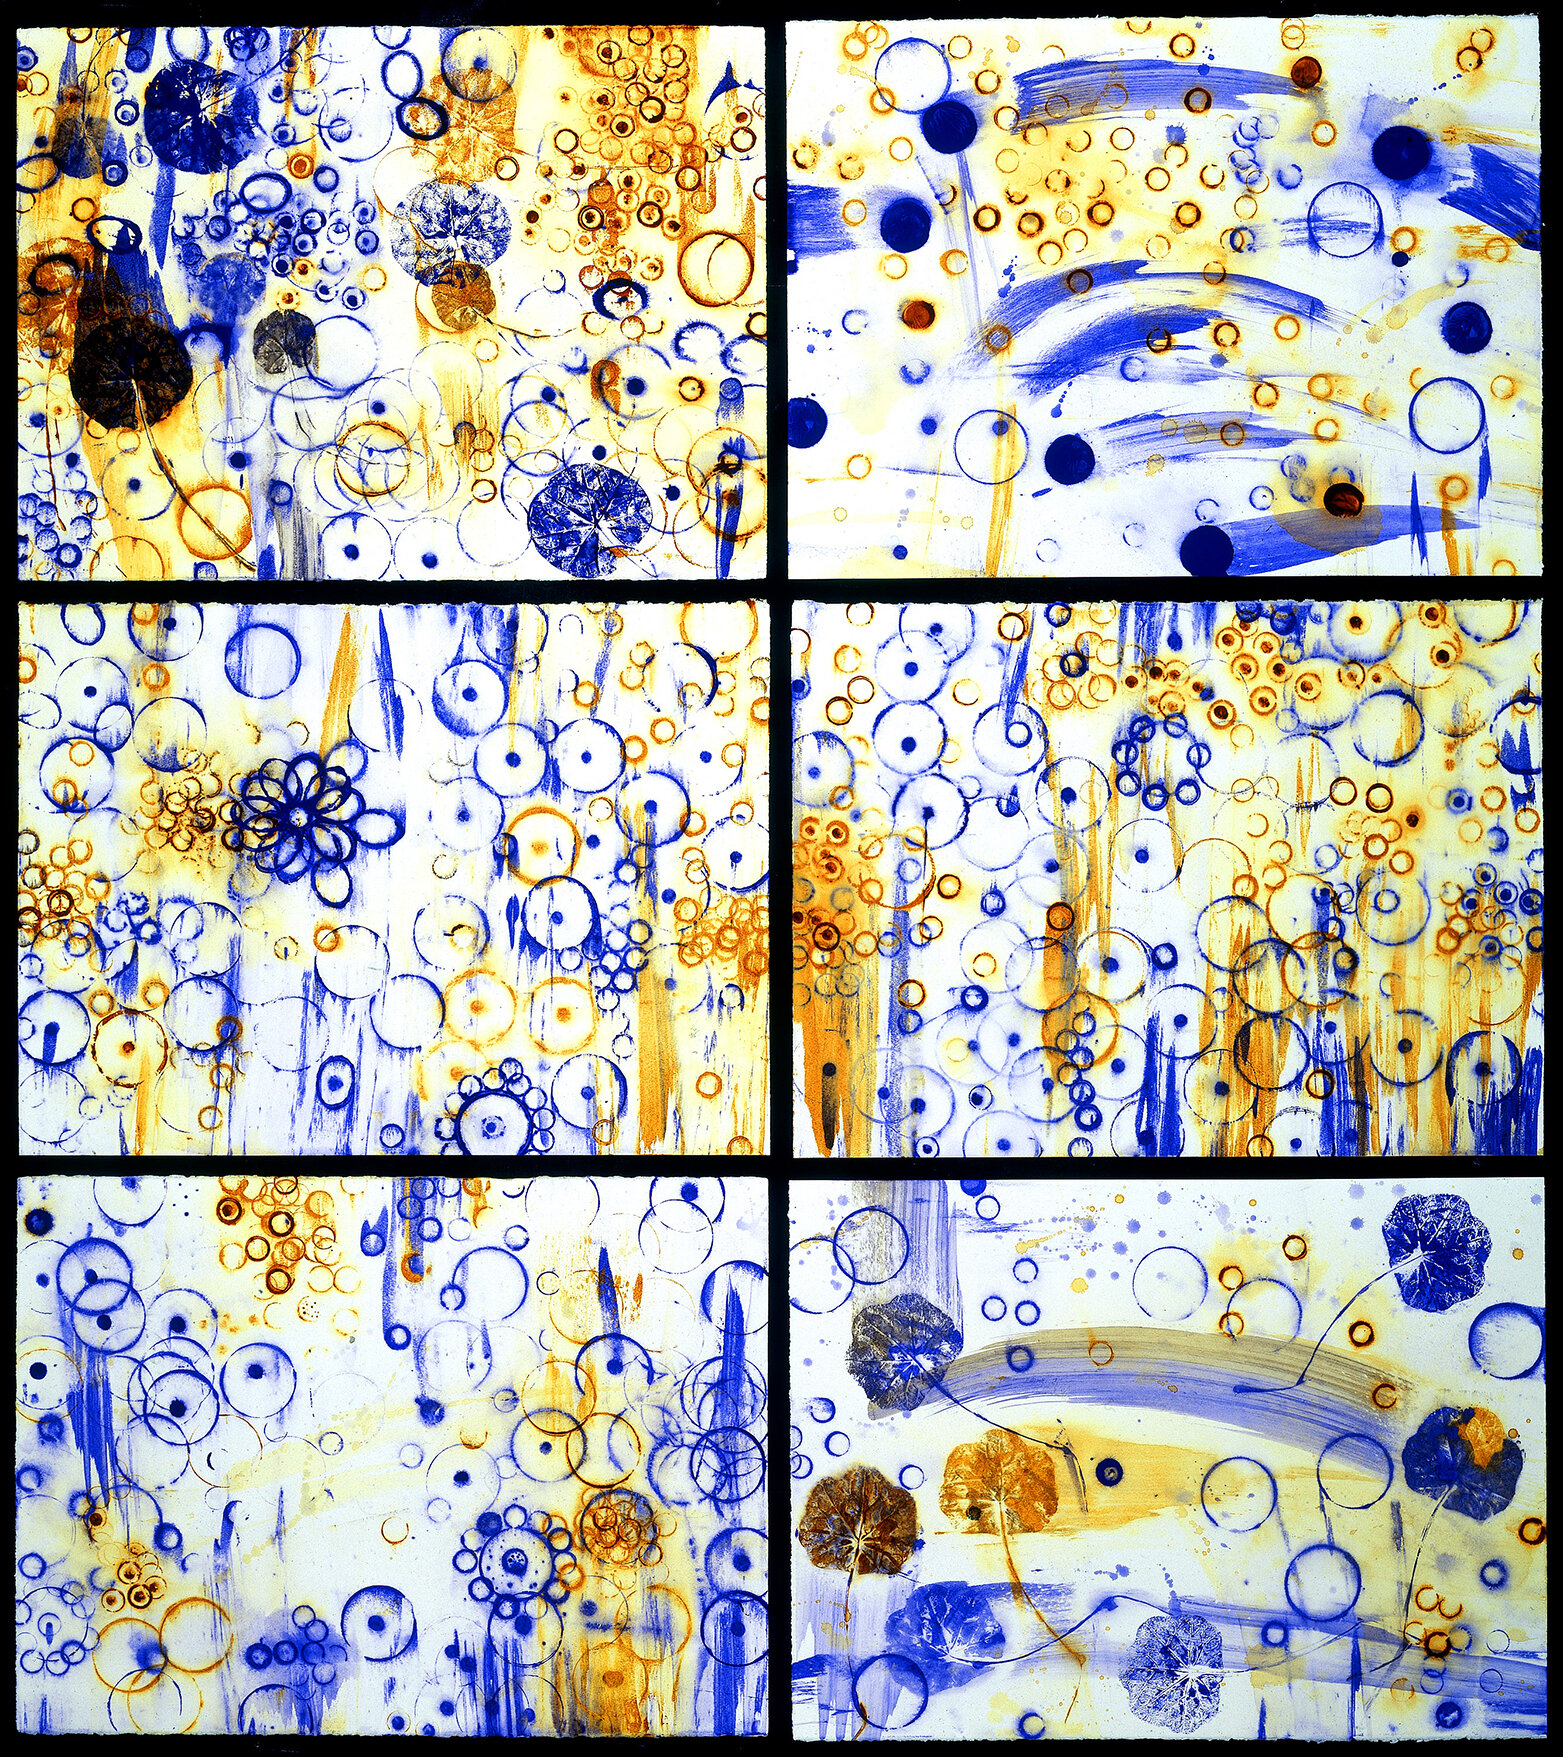   Blue Constellation Series I-XII , 2002, detail, acrylic on paper, each panel 22 x 30 inches. 12-panel wall installation, 142 inches x 62 inches  